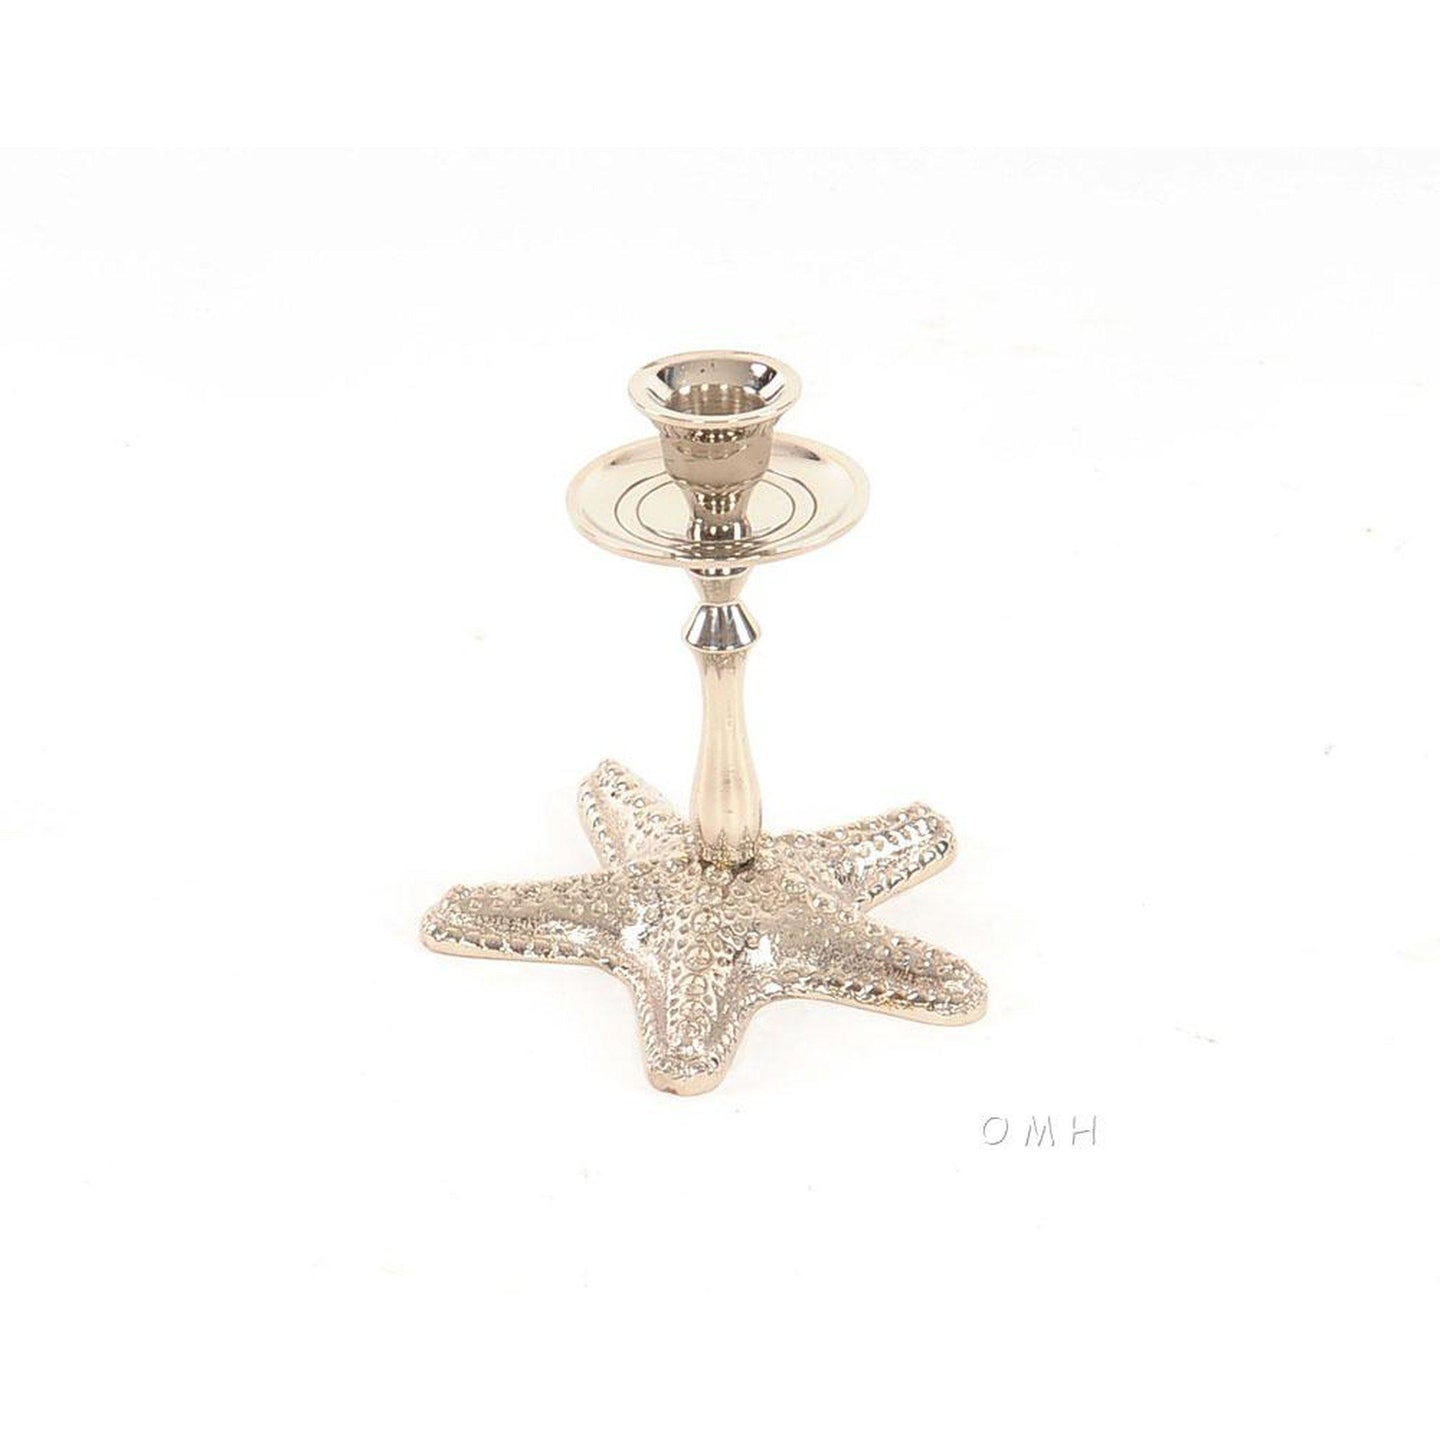 Old Modern Star Fish Candle Holder ND057